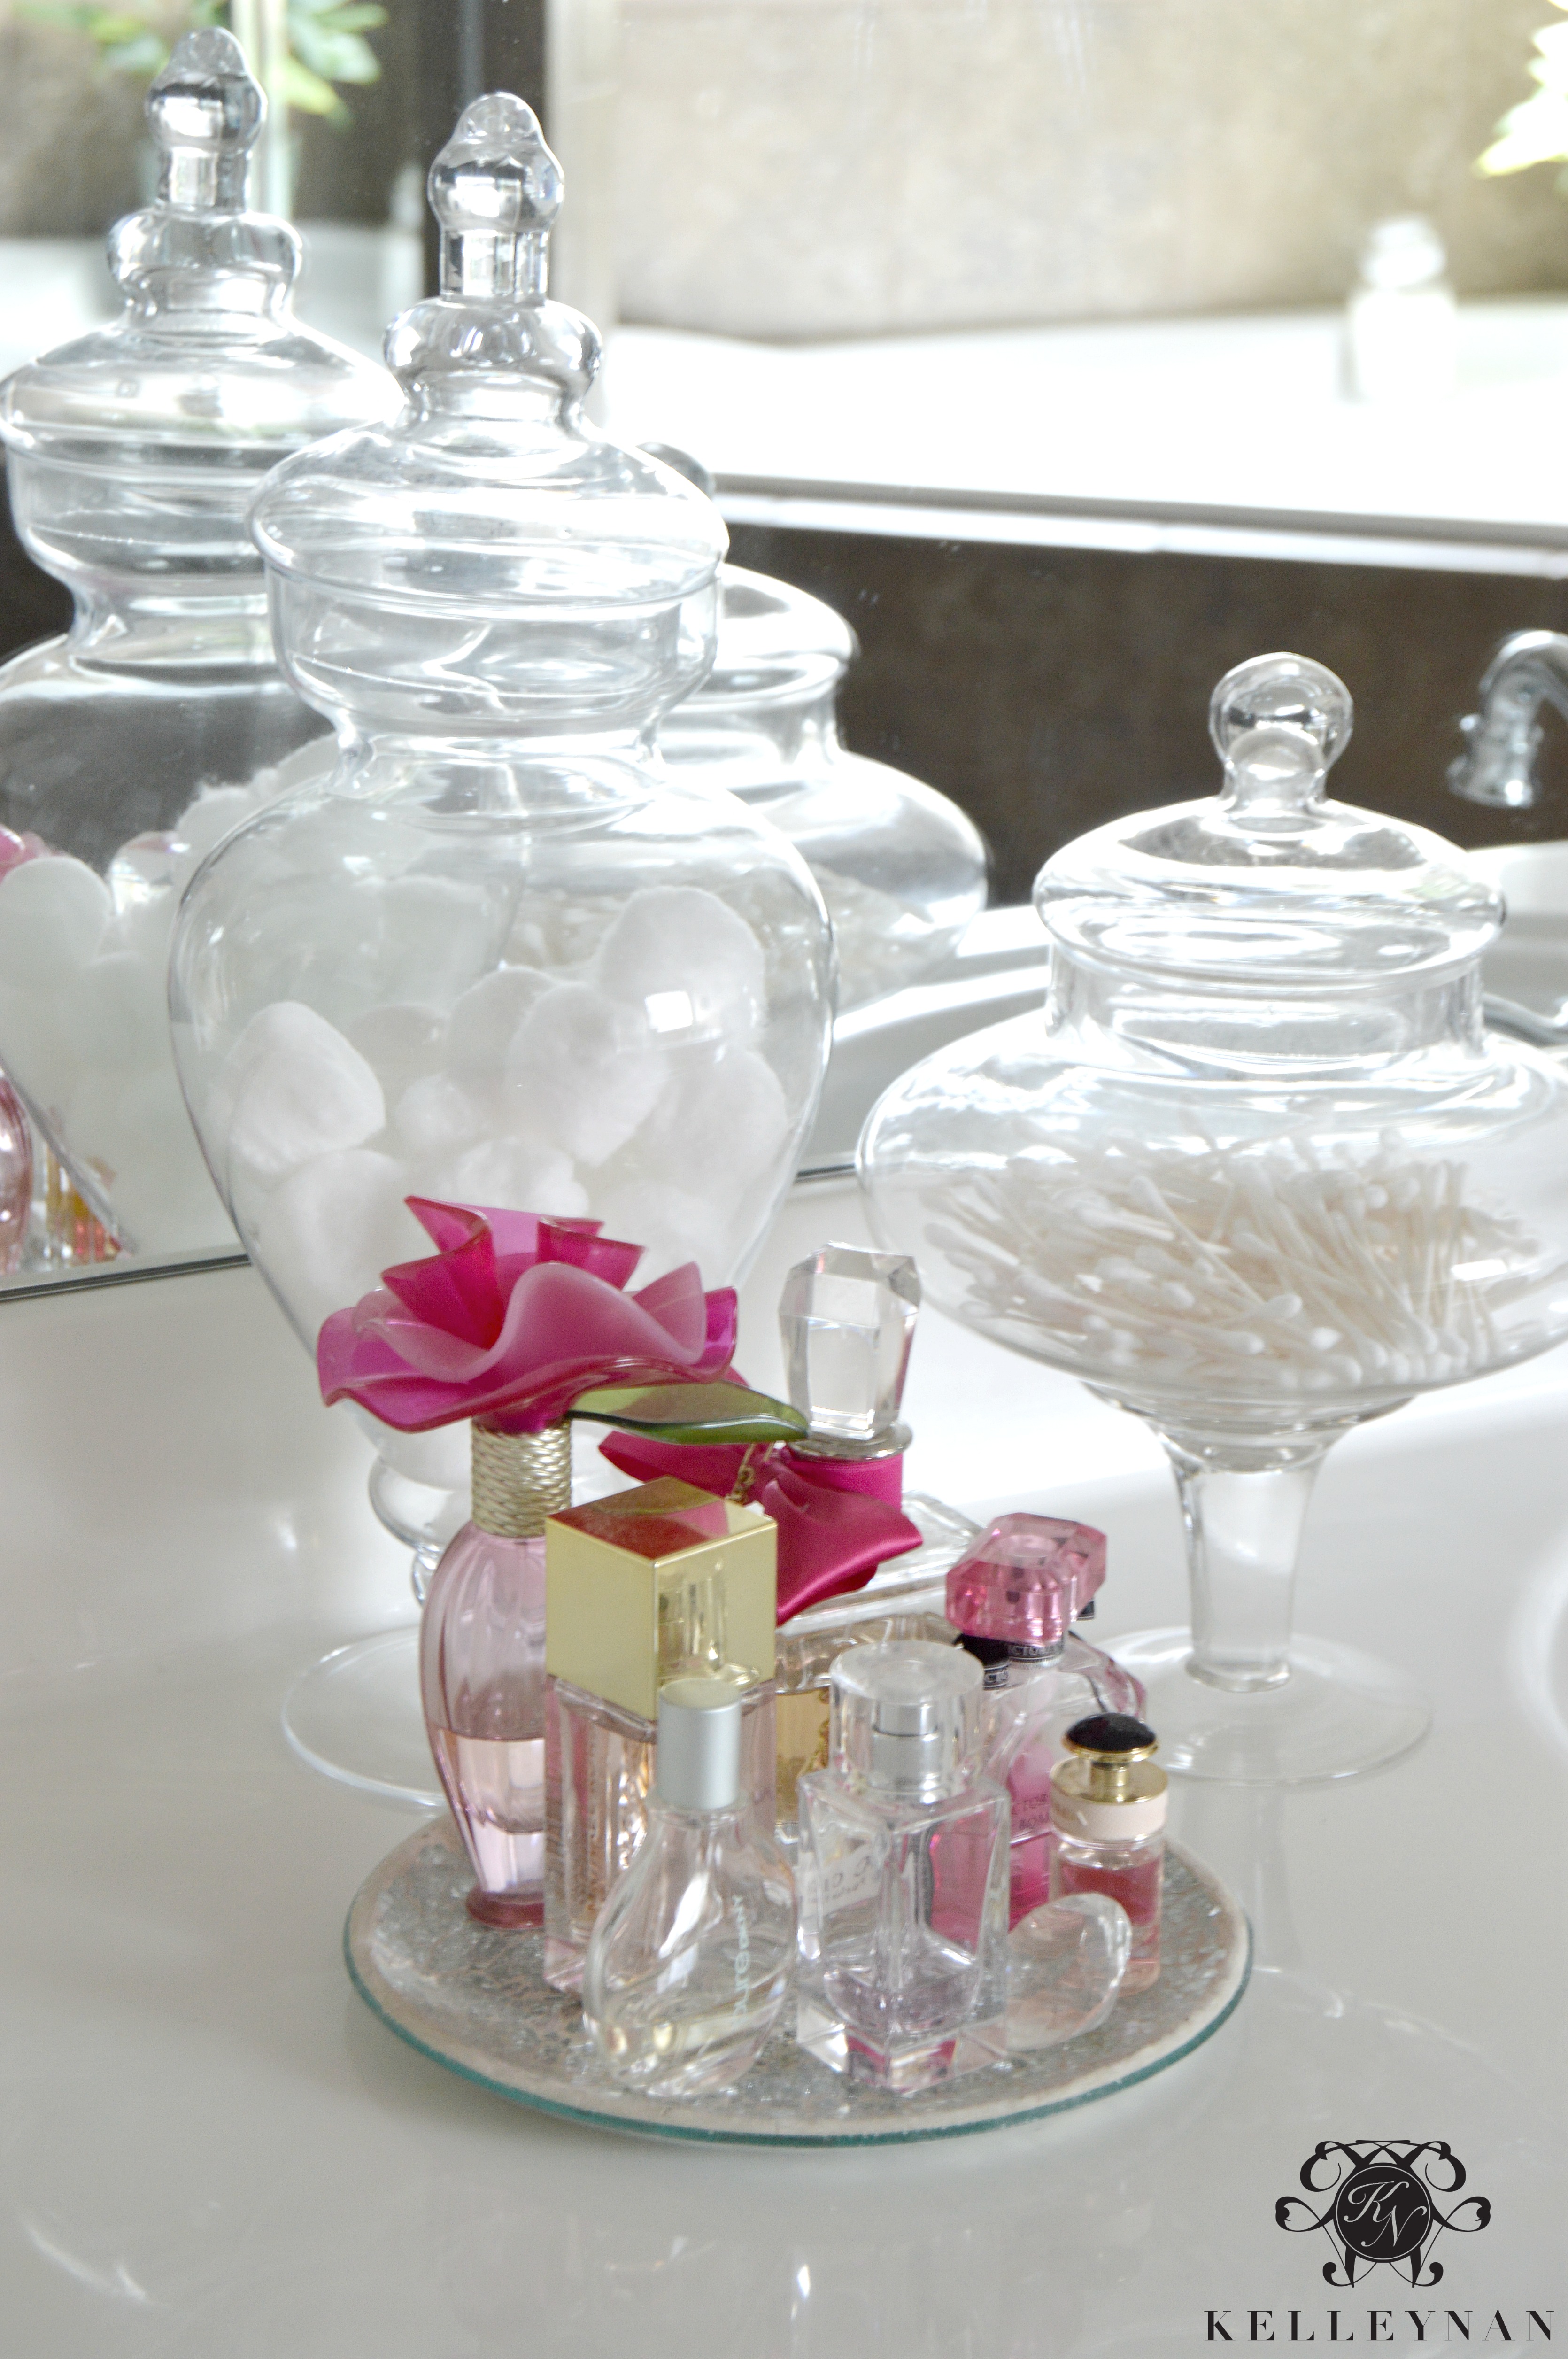 18 Ideas To Decorate With Glass Apothecary Jars - Decoholic